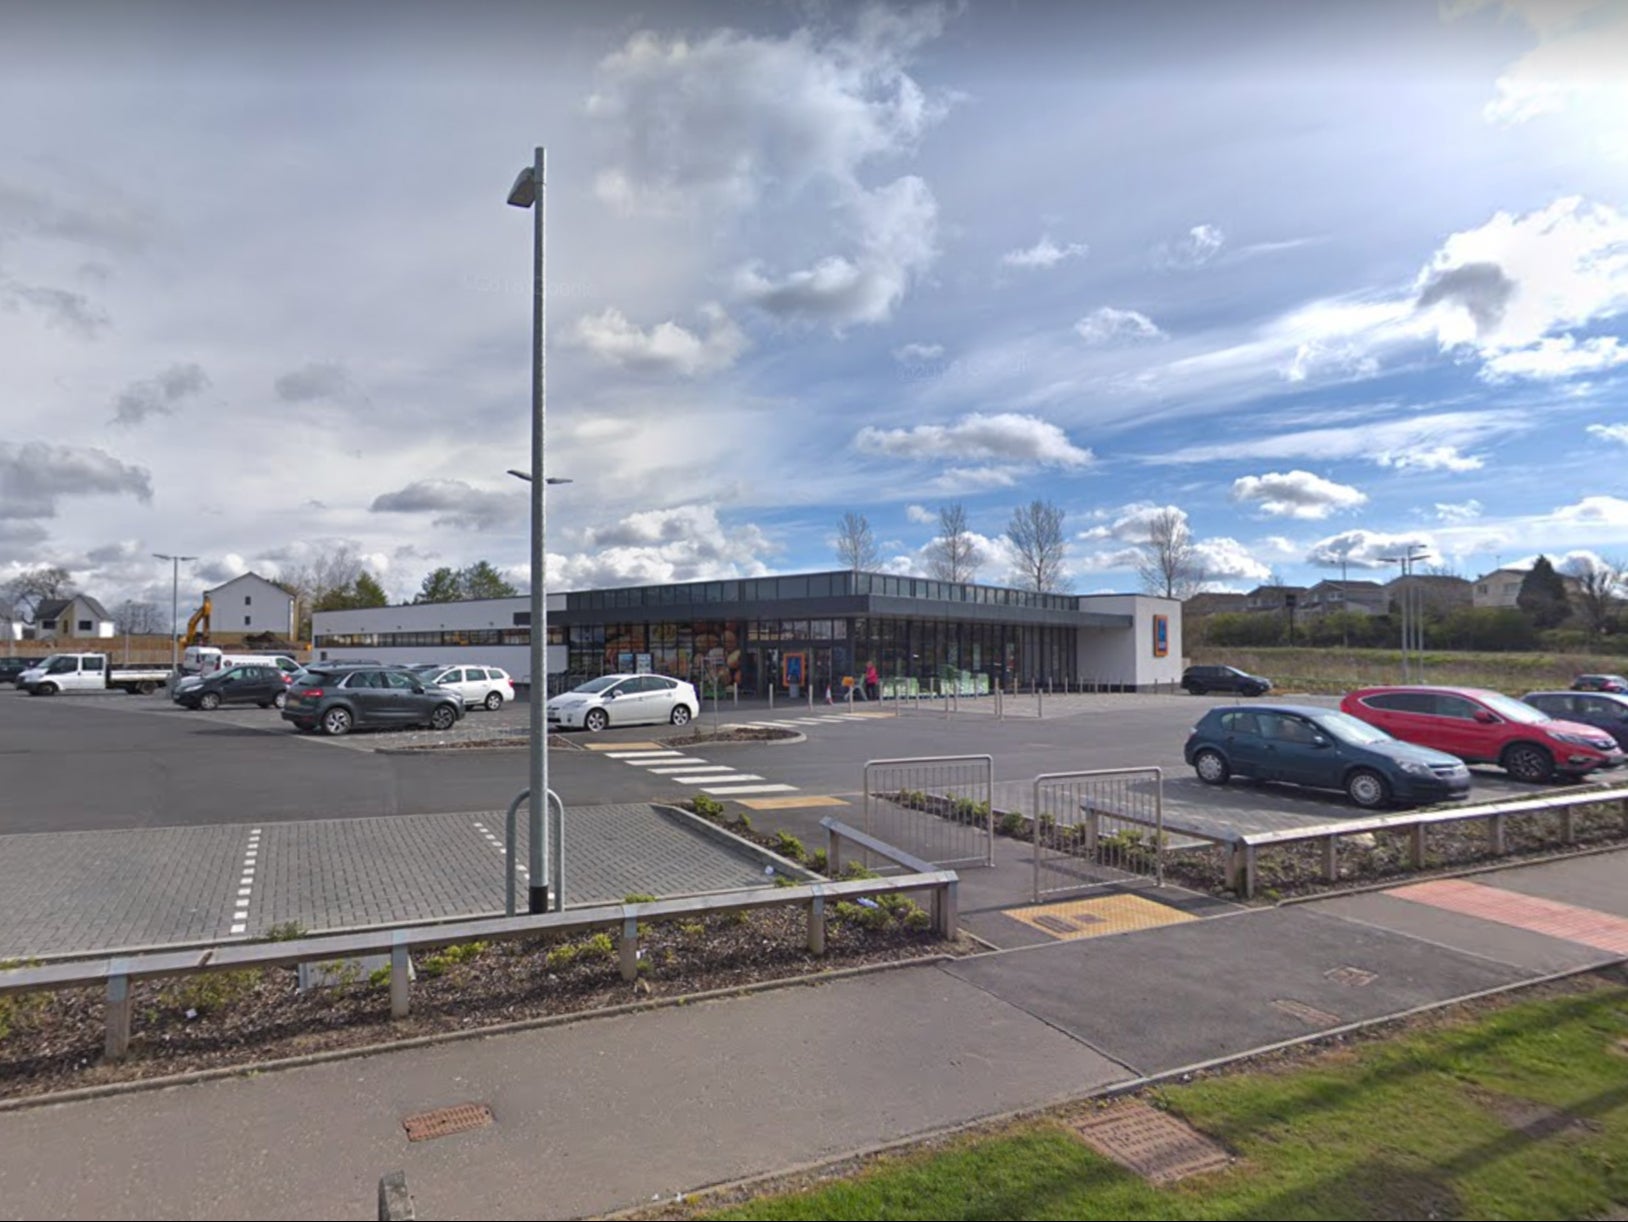 Police gathered outside the Newton Mearns branch of Aldi, seven miles southwest of Glasgow City Centre